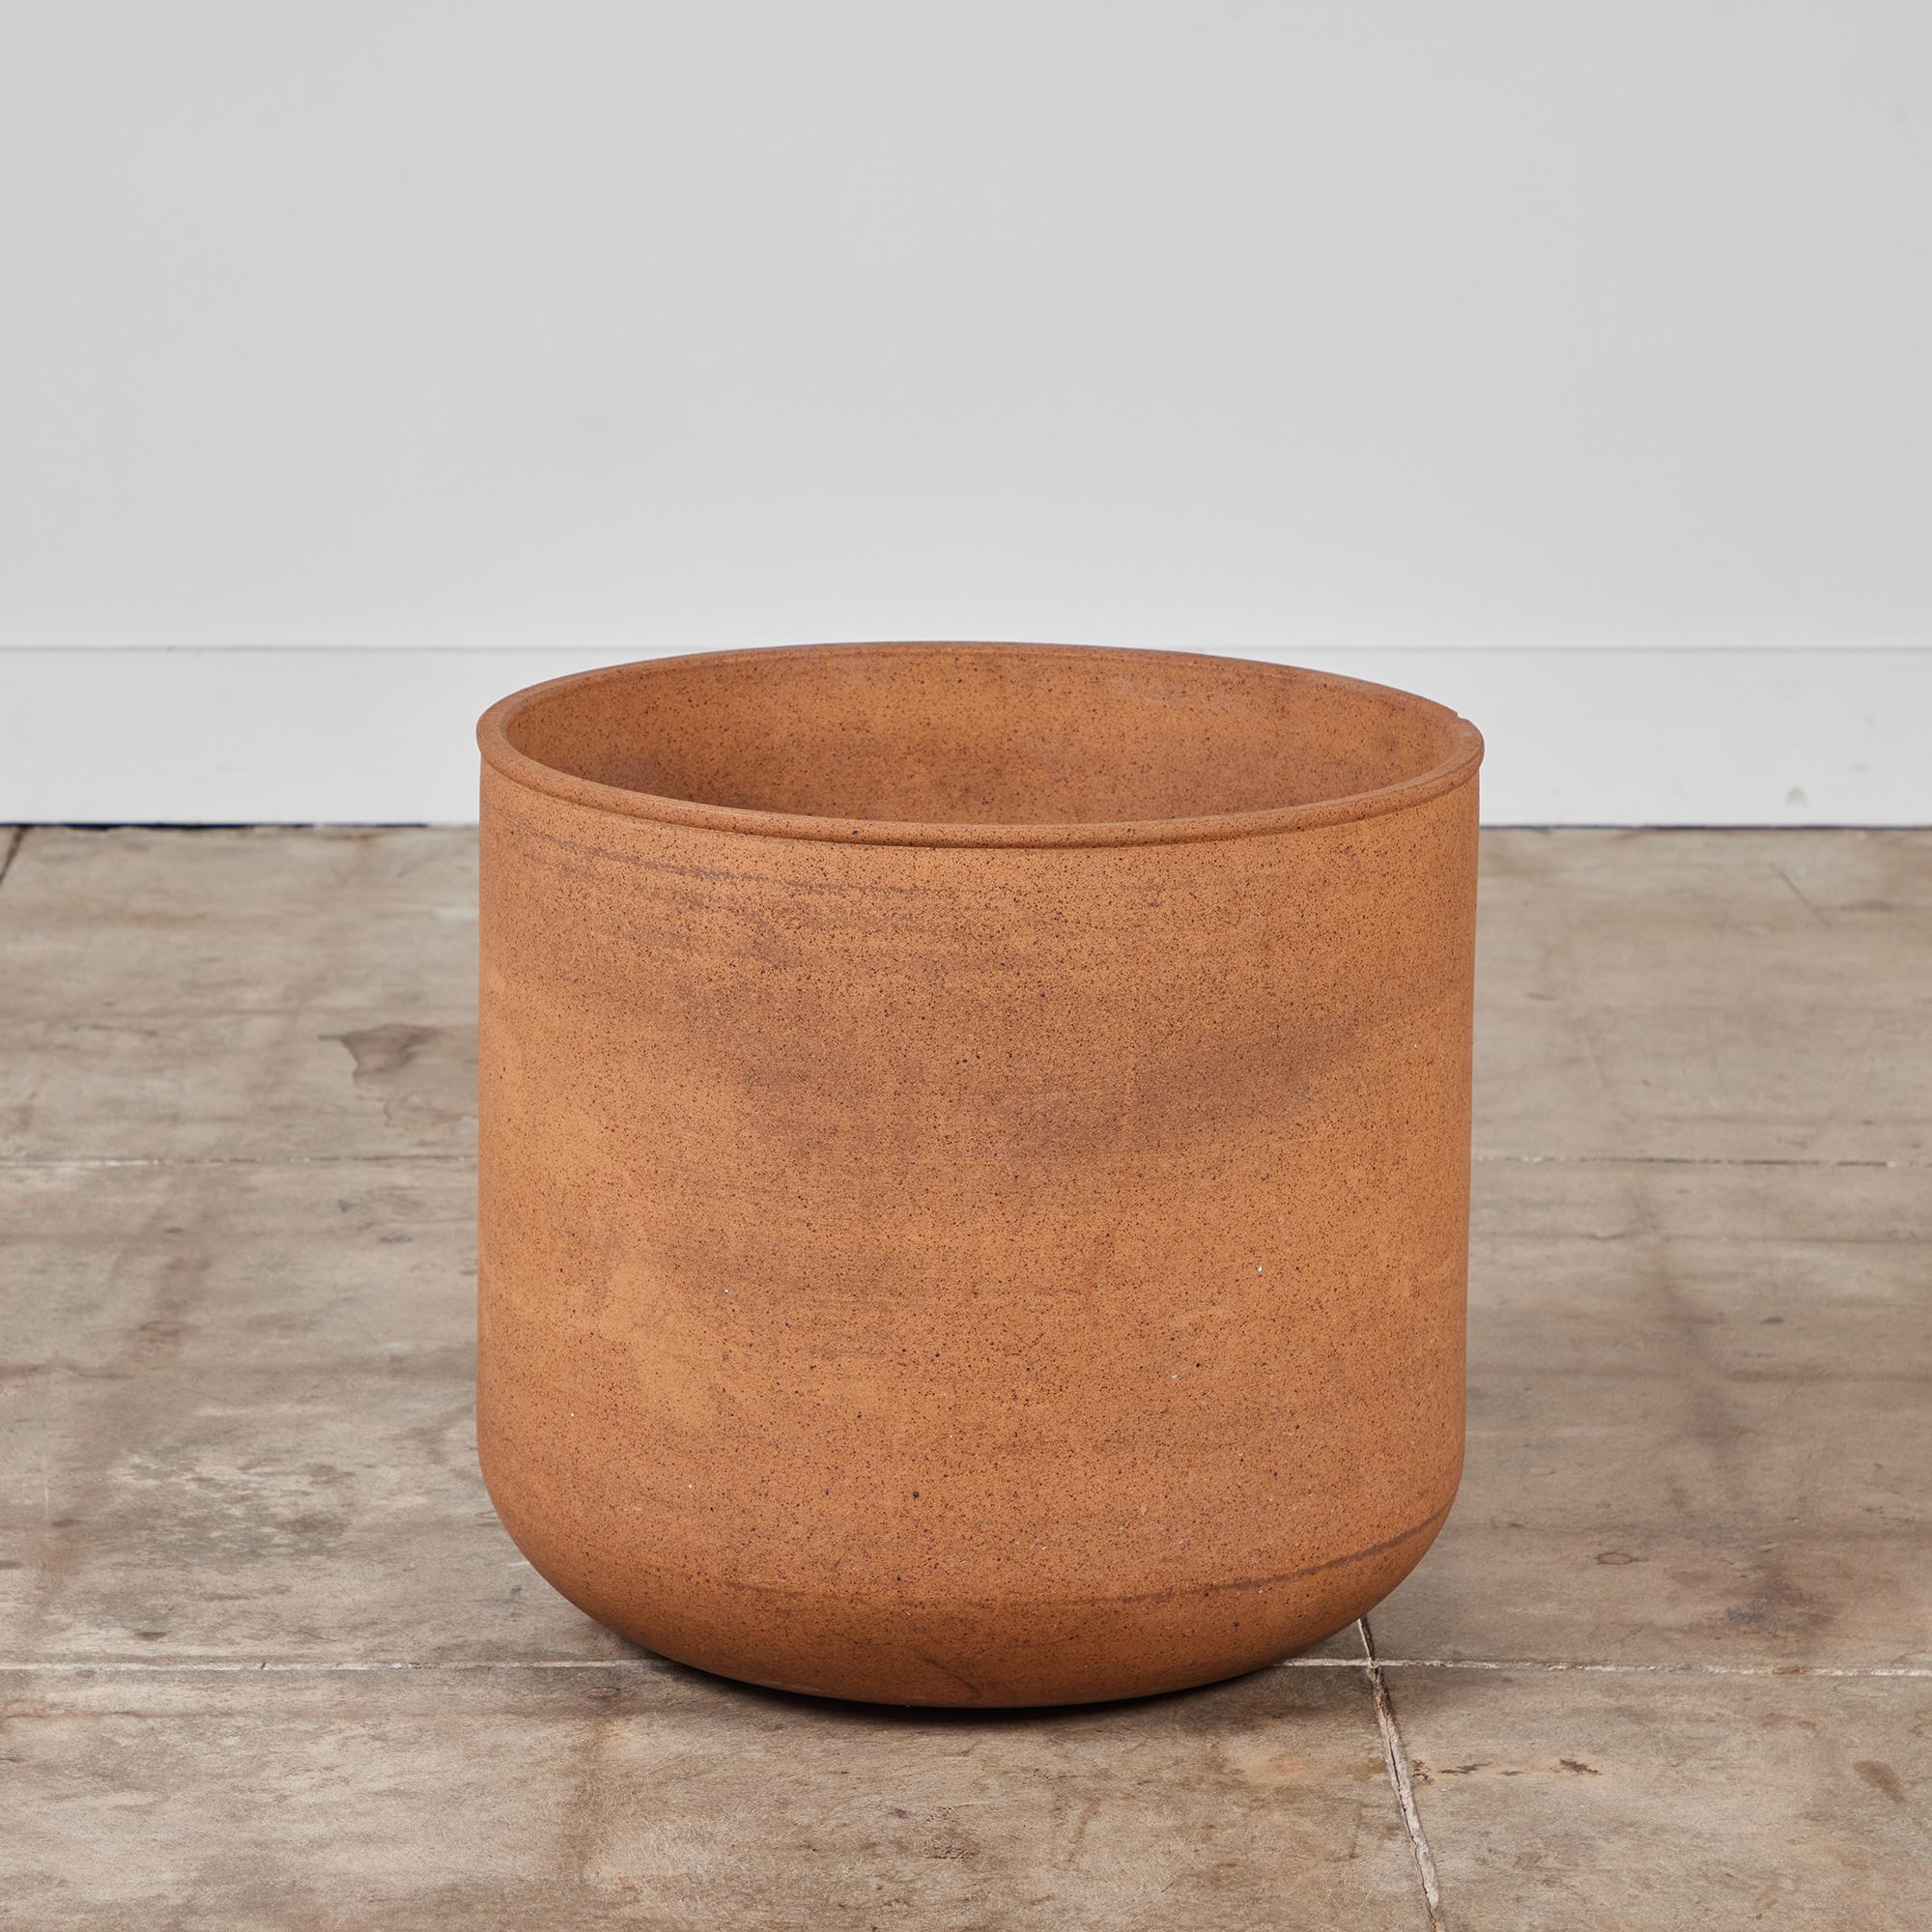 A tulip-shaped stoneware planter by Malcolm Leland for Architectural Pottery. This planter has a rounded bottom that widens towards the opening, a simple shape with a natural unglazed stoneware body.

Dimensions
21